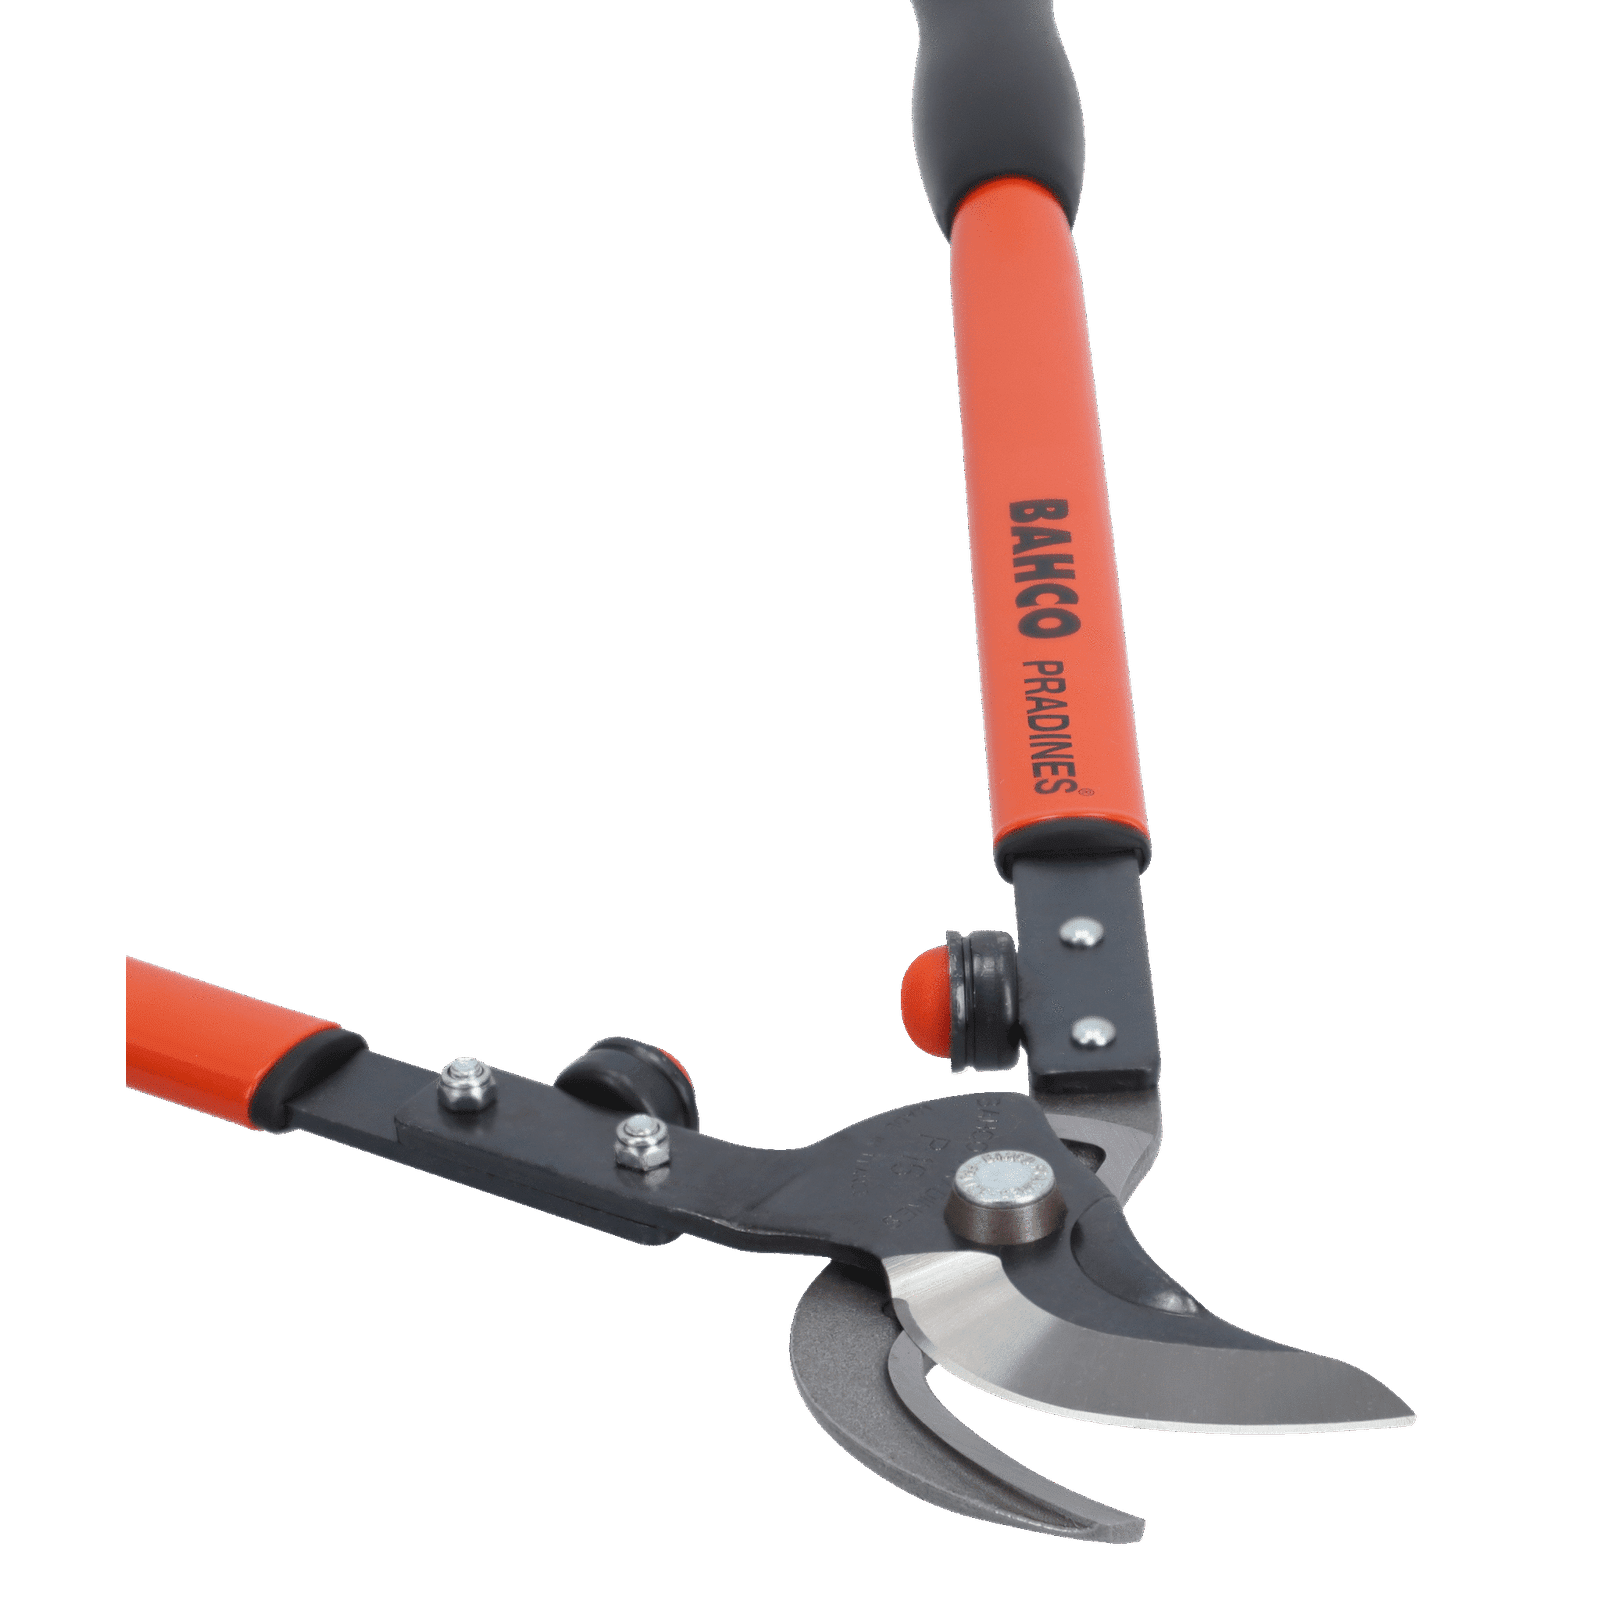 Bahco Bypass 24 Inch Lopper P16-60-F